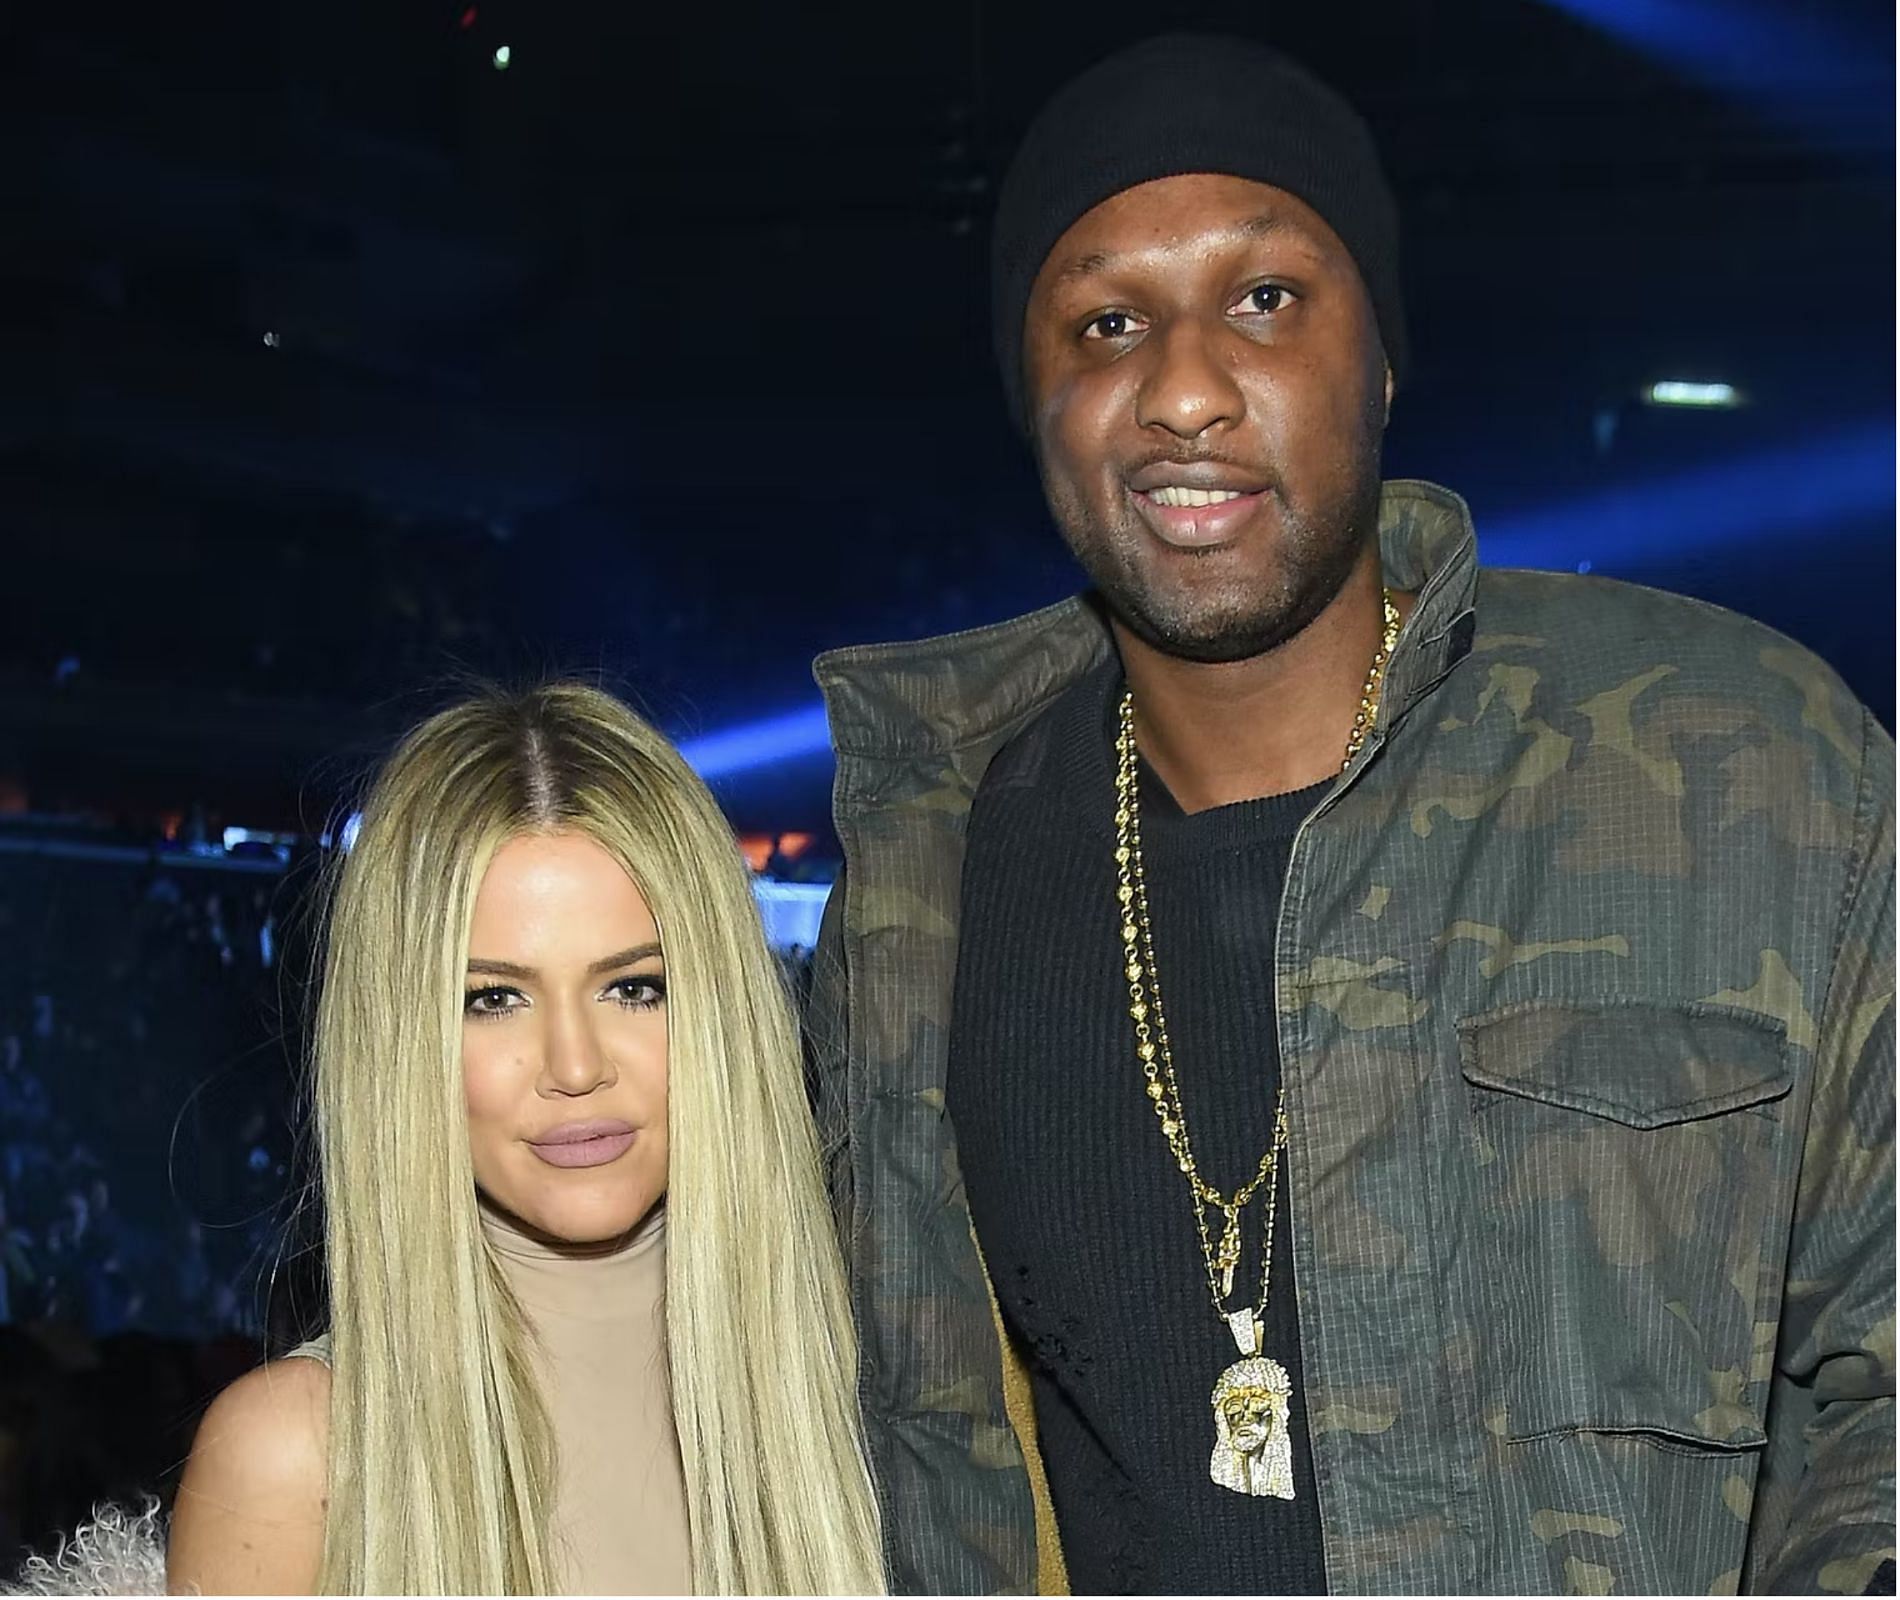 Khloe Kardashian was married to Lamar Odom for four years before they filed for divorce (Image via Jamie McCarthy/Getty Images)